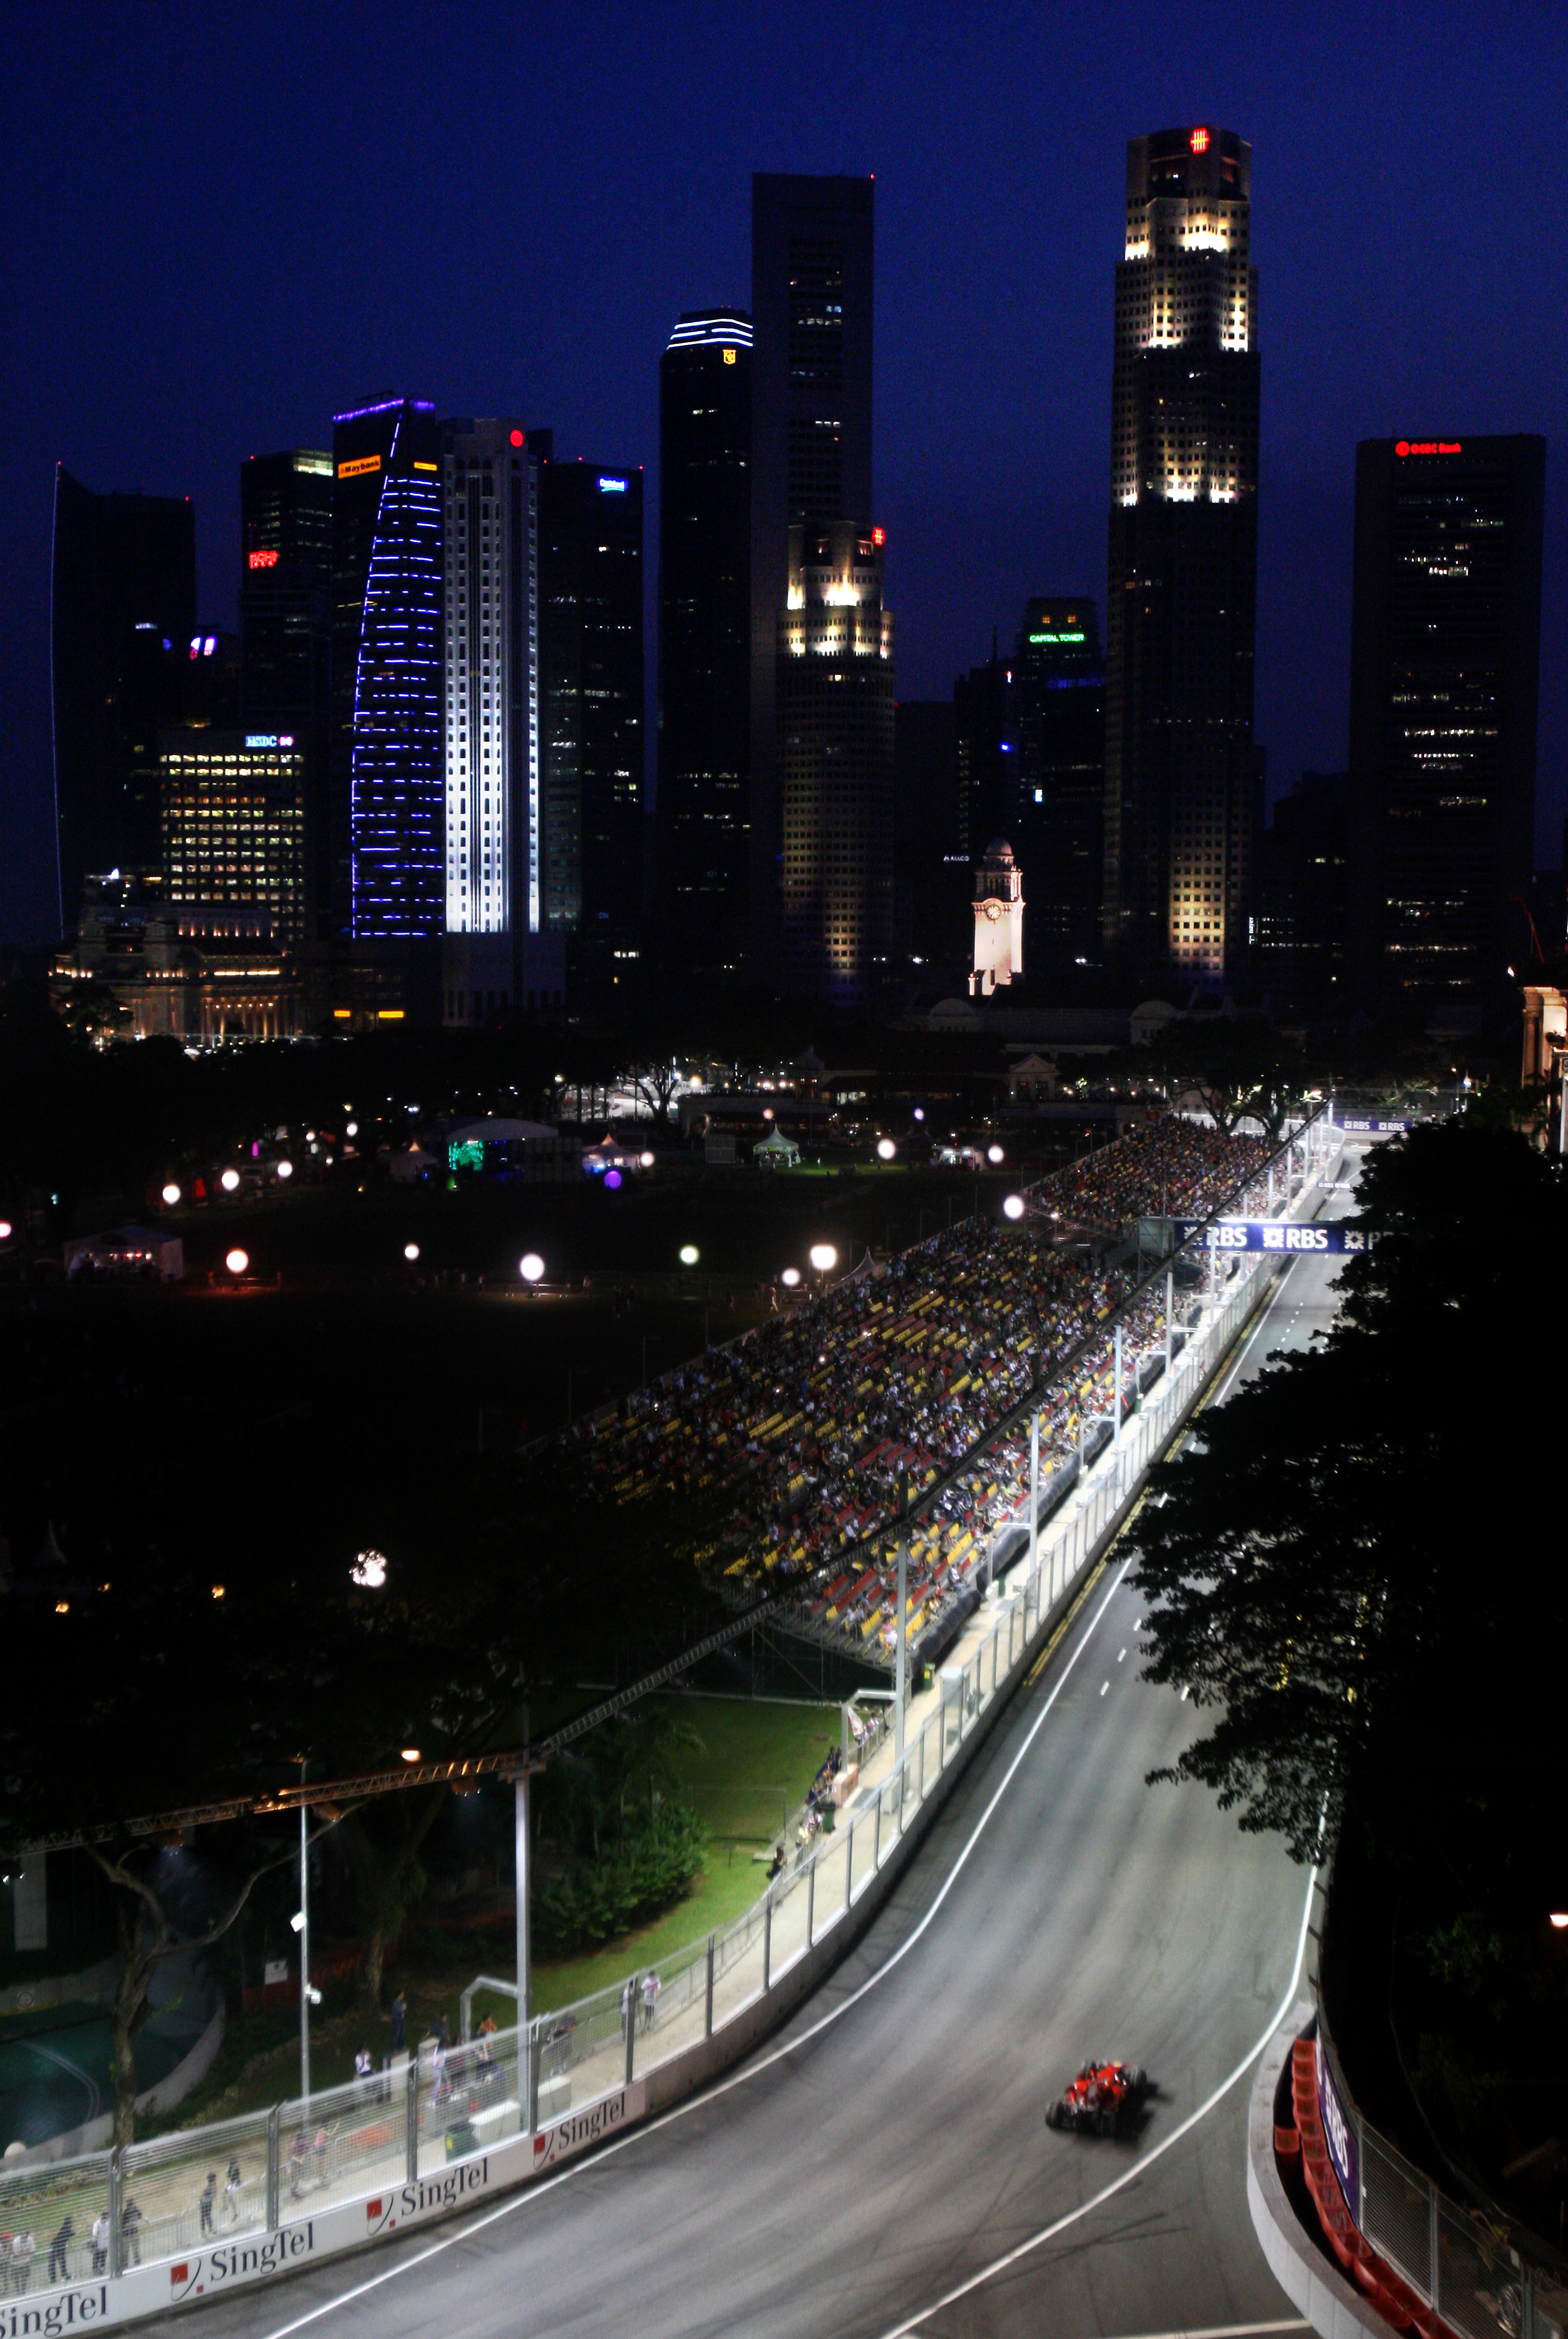 The Marina Bay Circuit will be part of the racing calendar until 2028